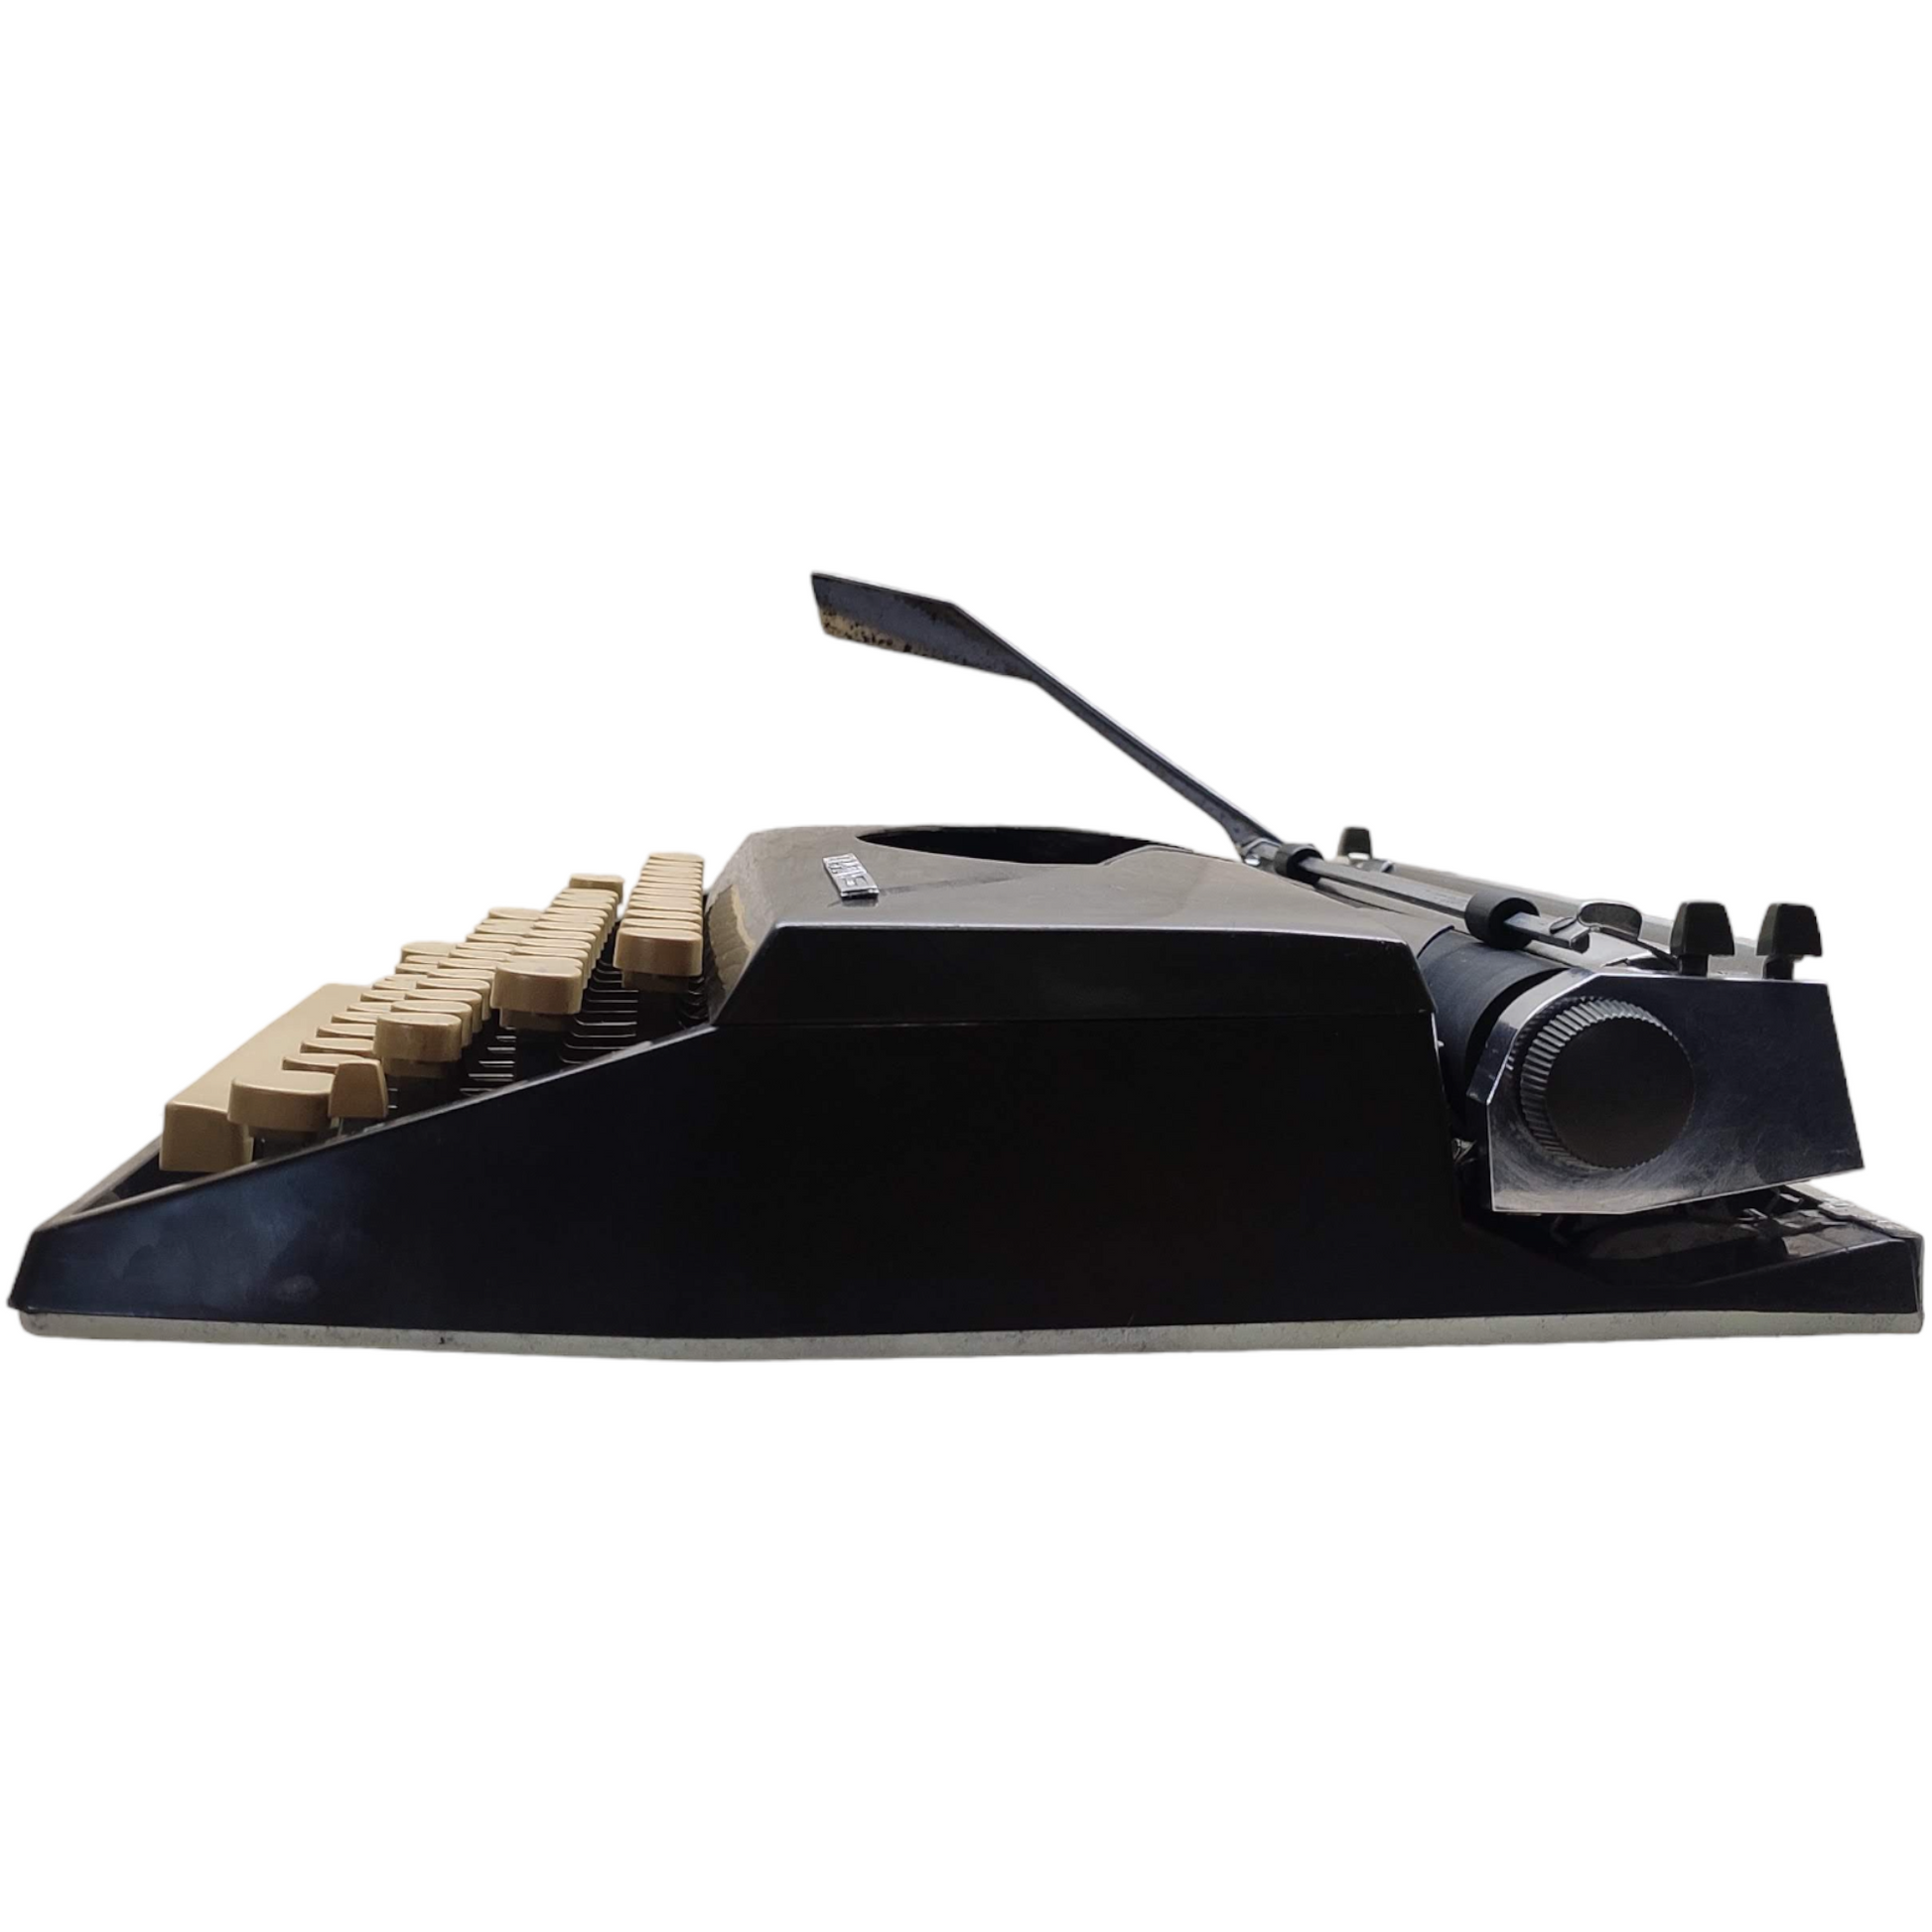 Image of Adler Tippa S Typewriter. Available from universaltypewritercompany.in